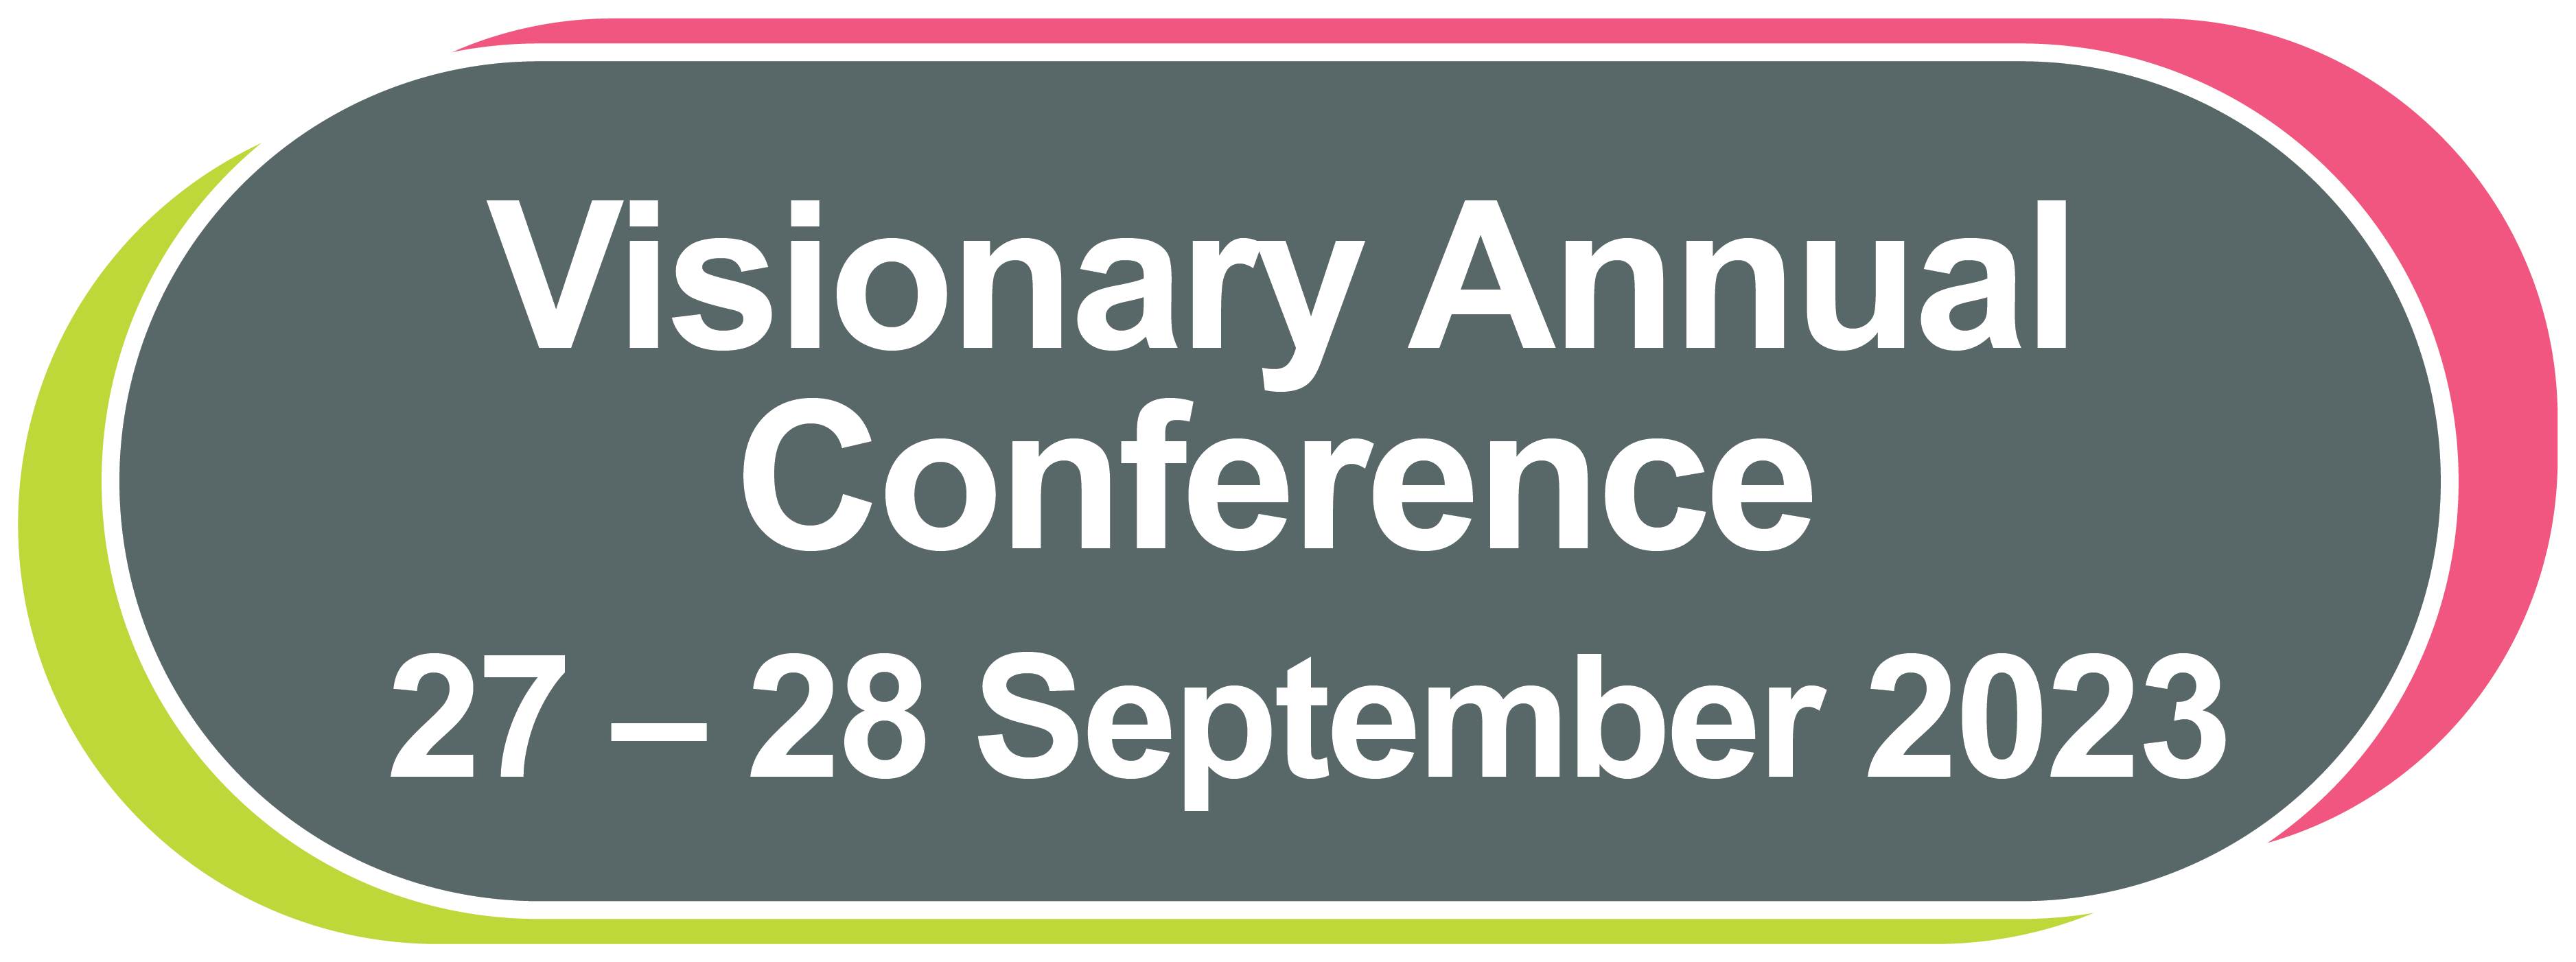 Visionary Annual Conference logo, 27 - 28 September 2023.